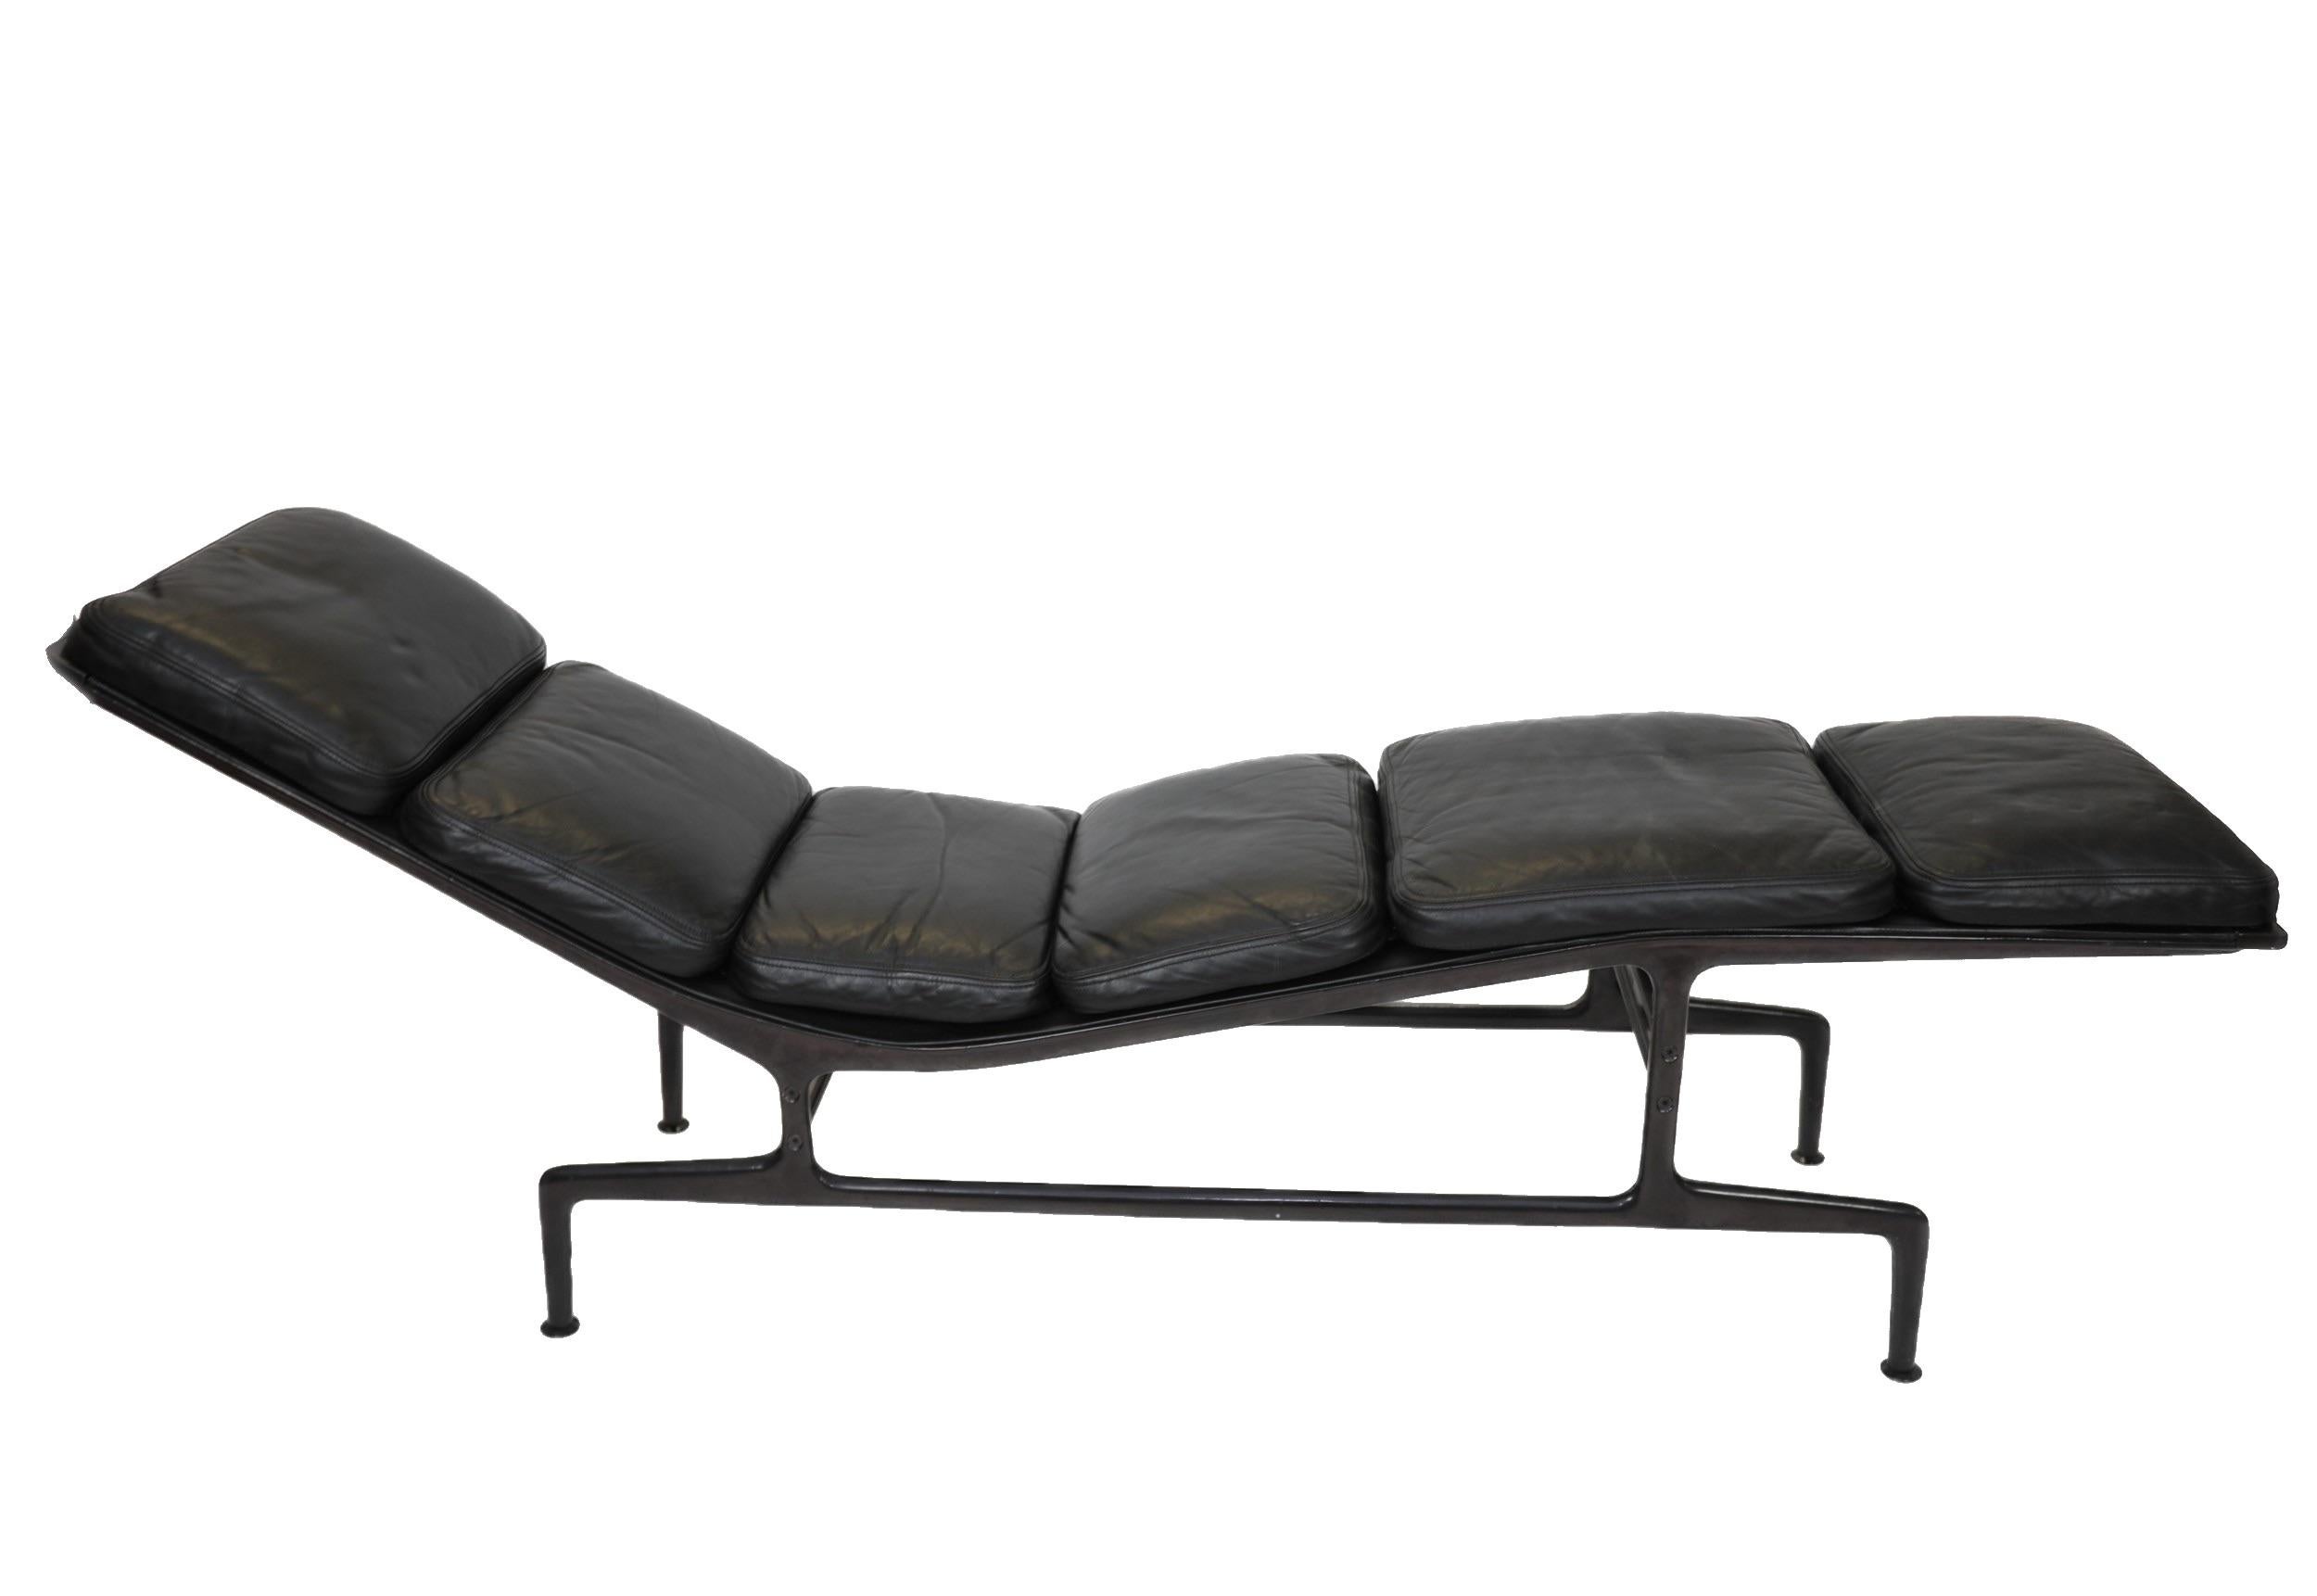 Charles and Ray Eames chaise lounge 
Manufactured by Herman Miller.
Original eggplant color frame.
Original leather sling and cushions.